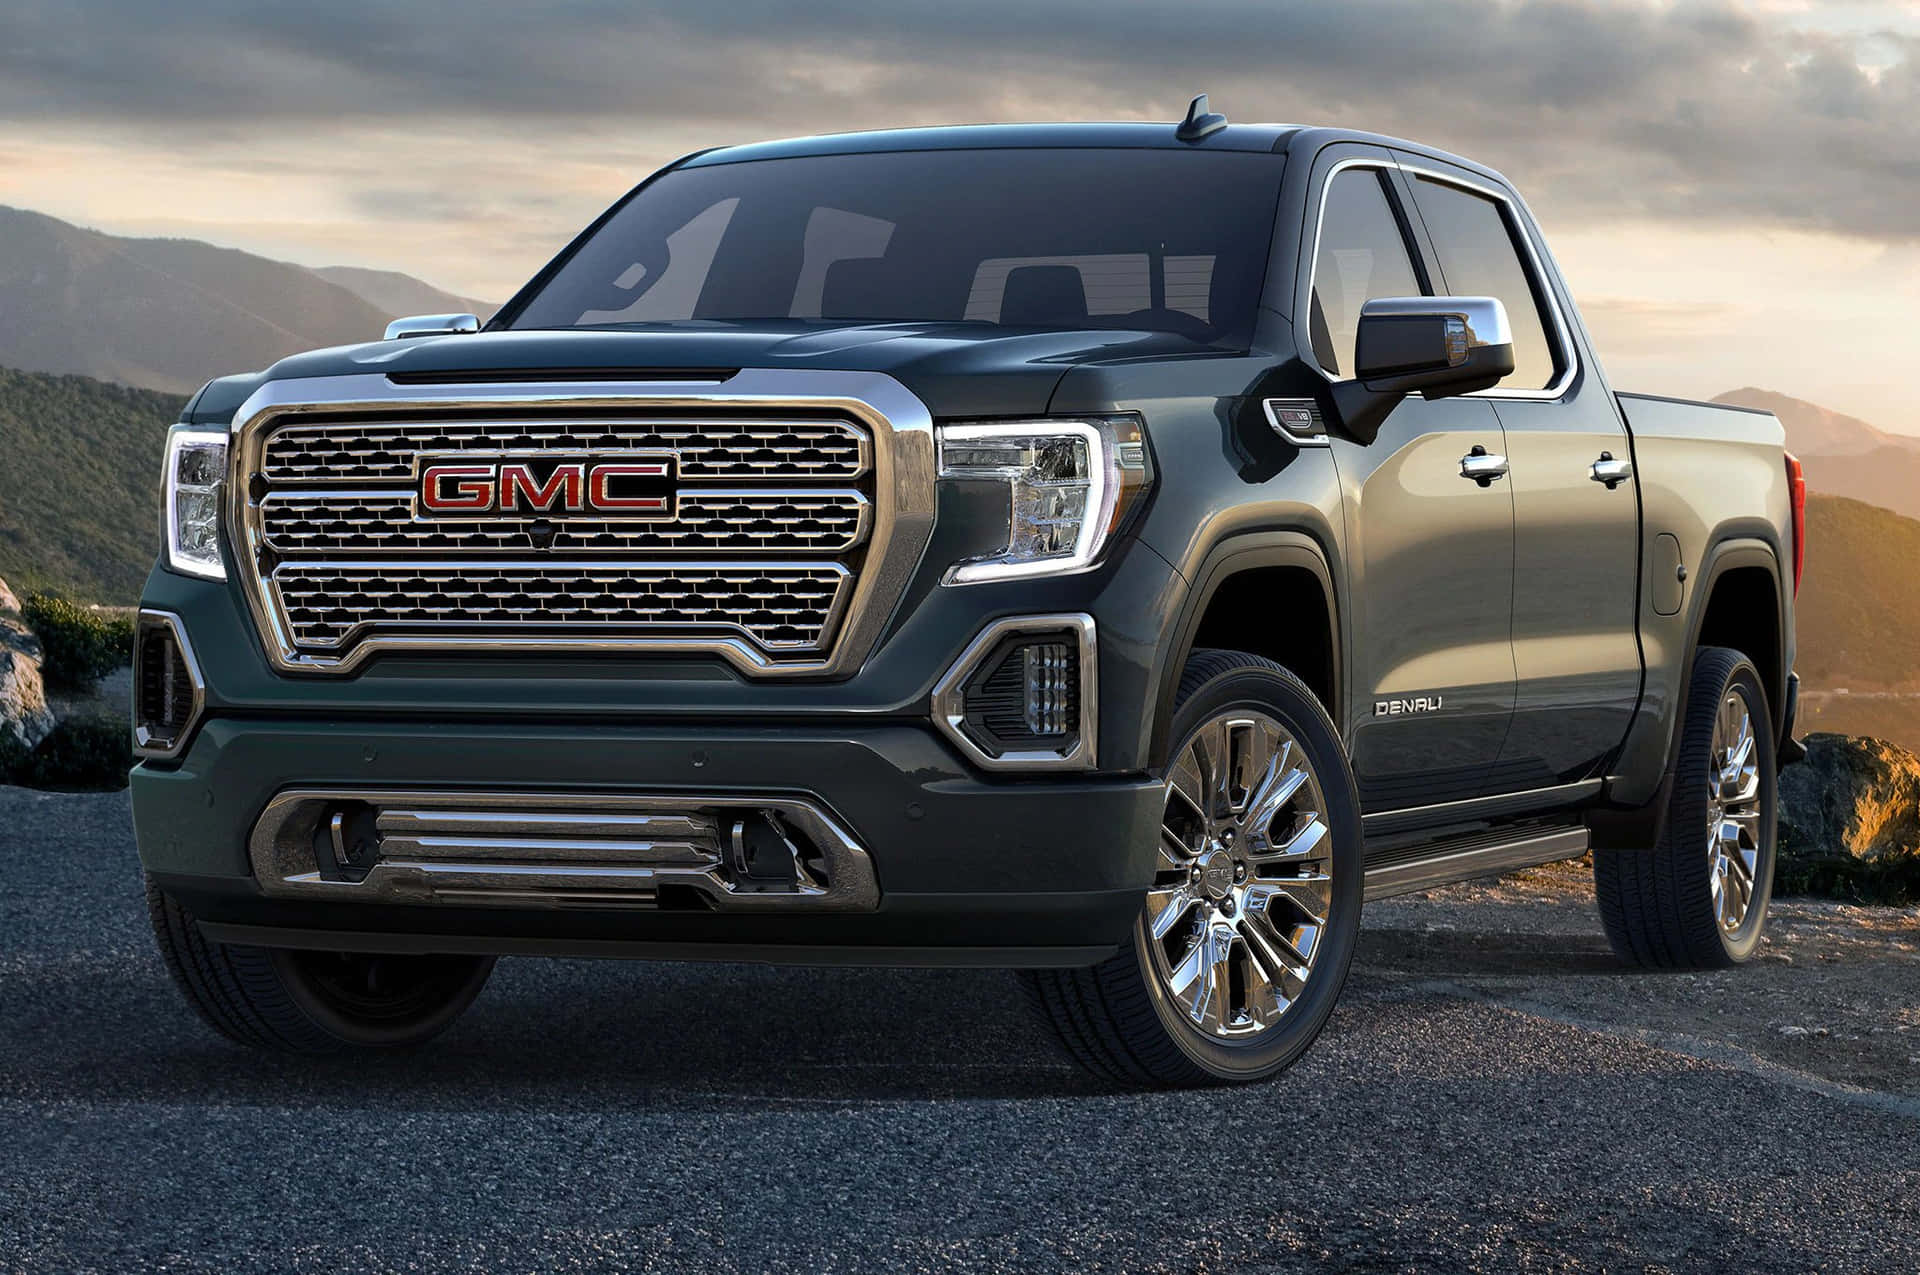 The 2020 Gmc Sierra Is Shown On A Mountain Road